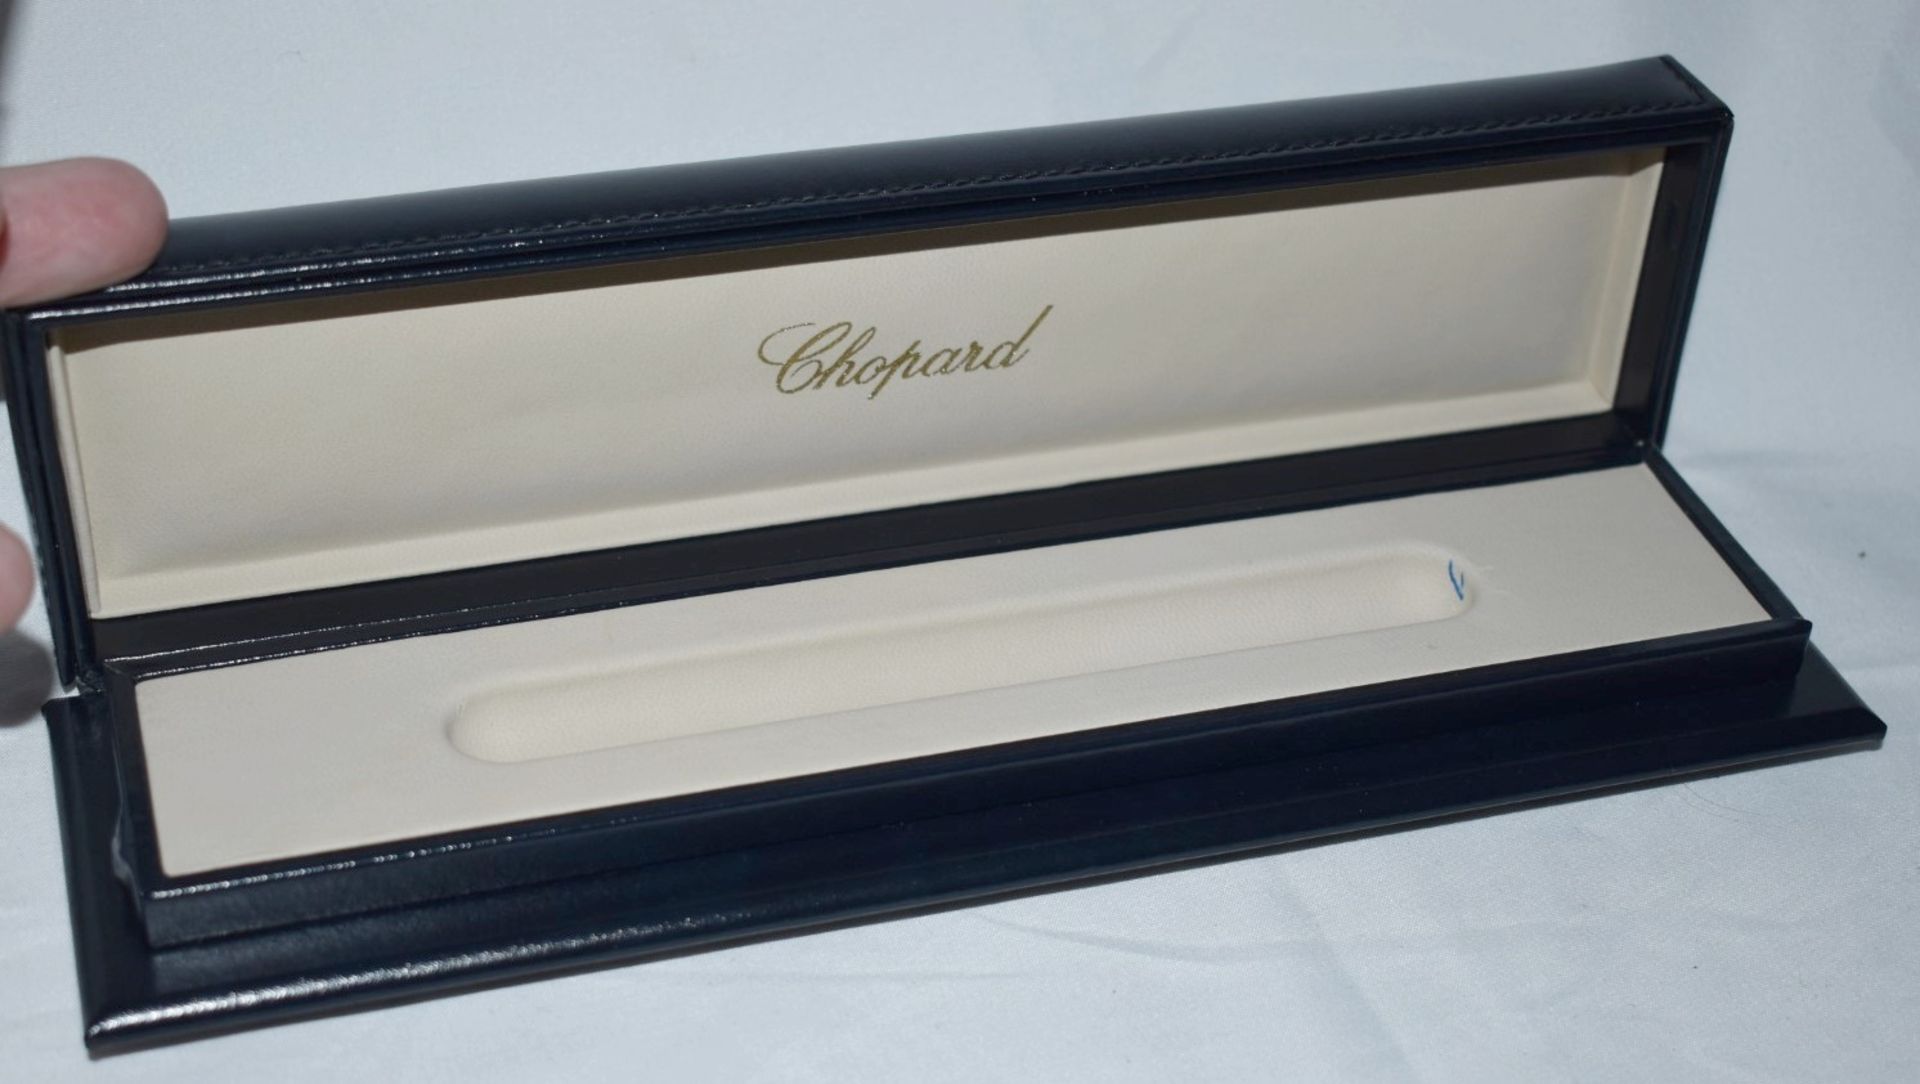 1 x CHOPARD 'Classic' Luxury Ballpoint Pen With Presentation Case, Navy Blue - Boxed Stock - - Image 11 of 11